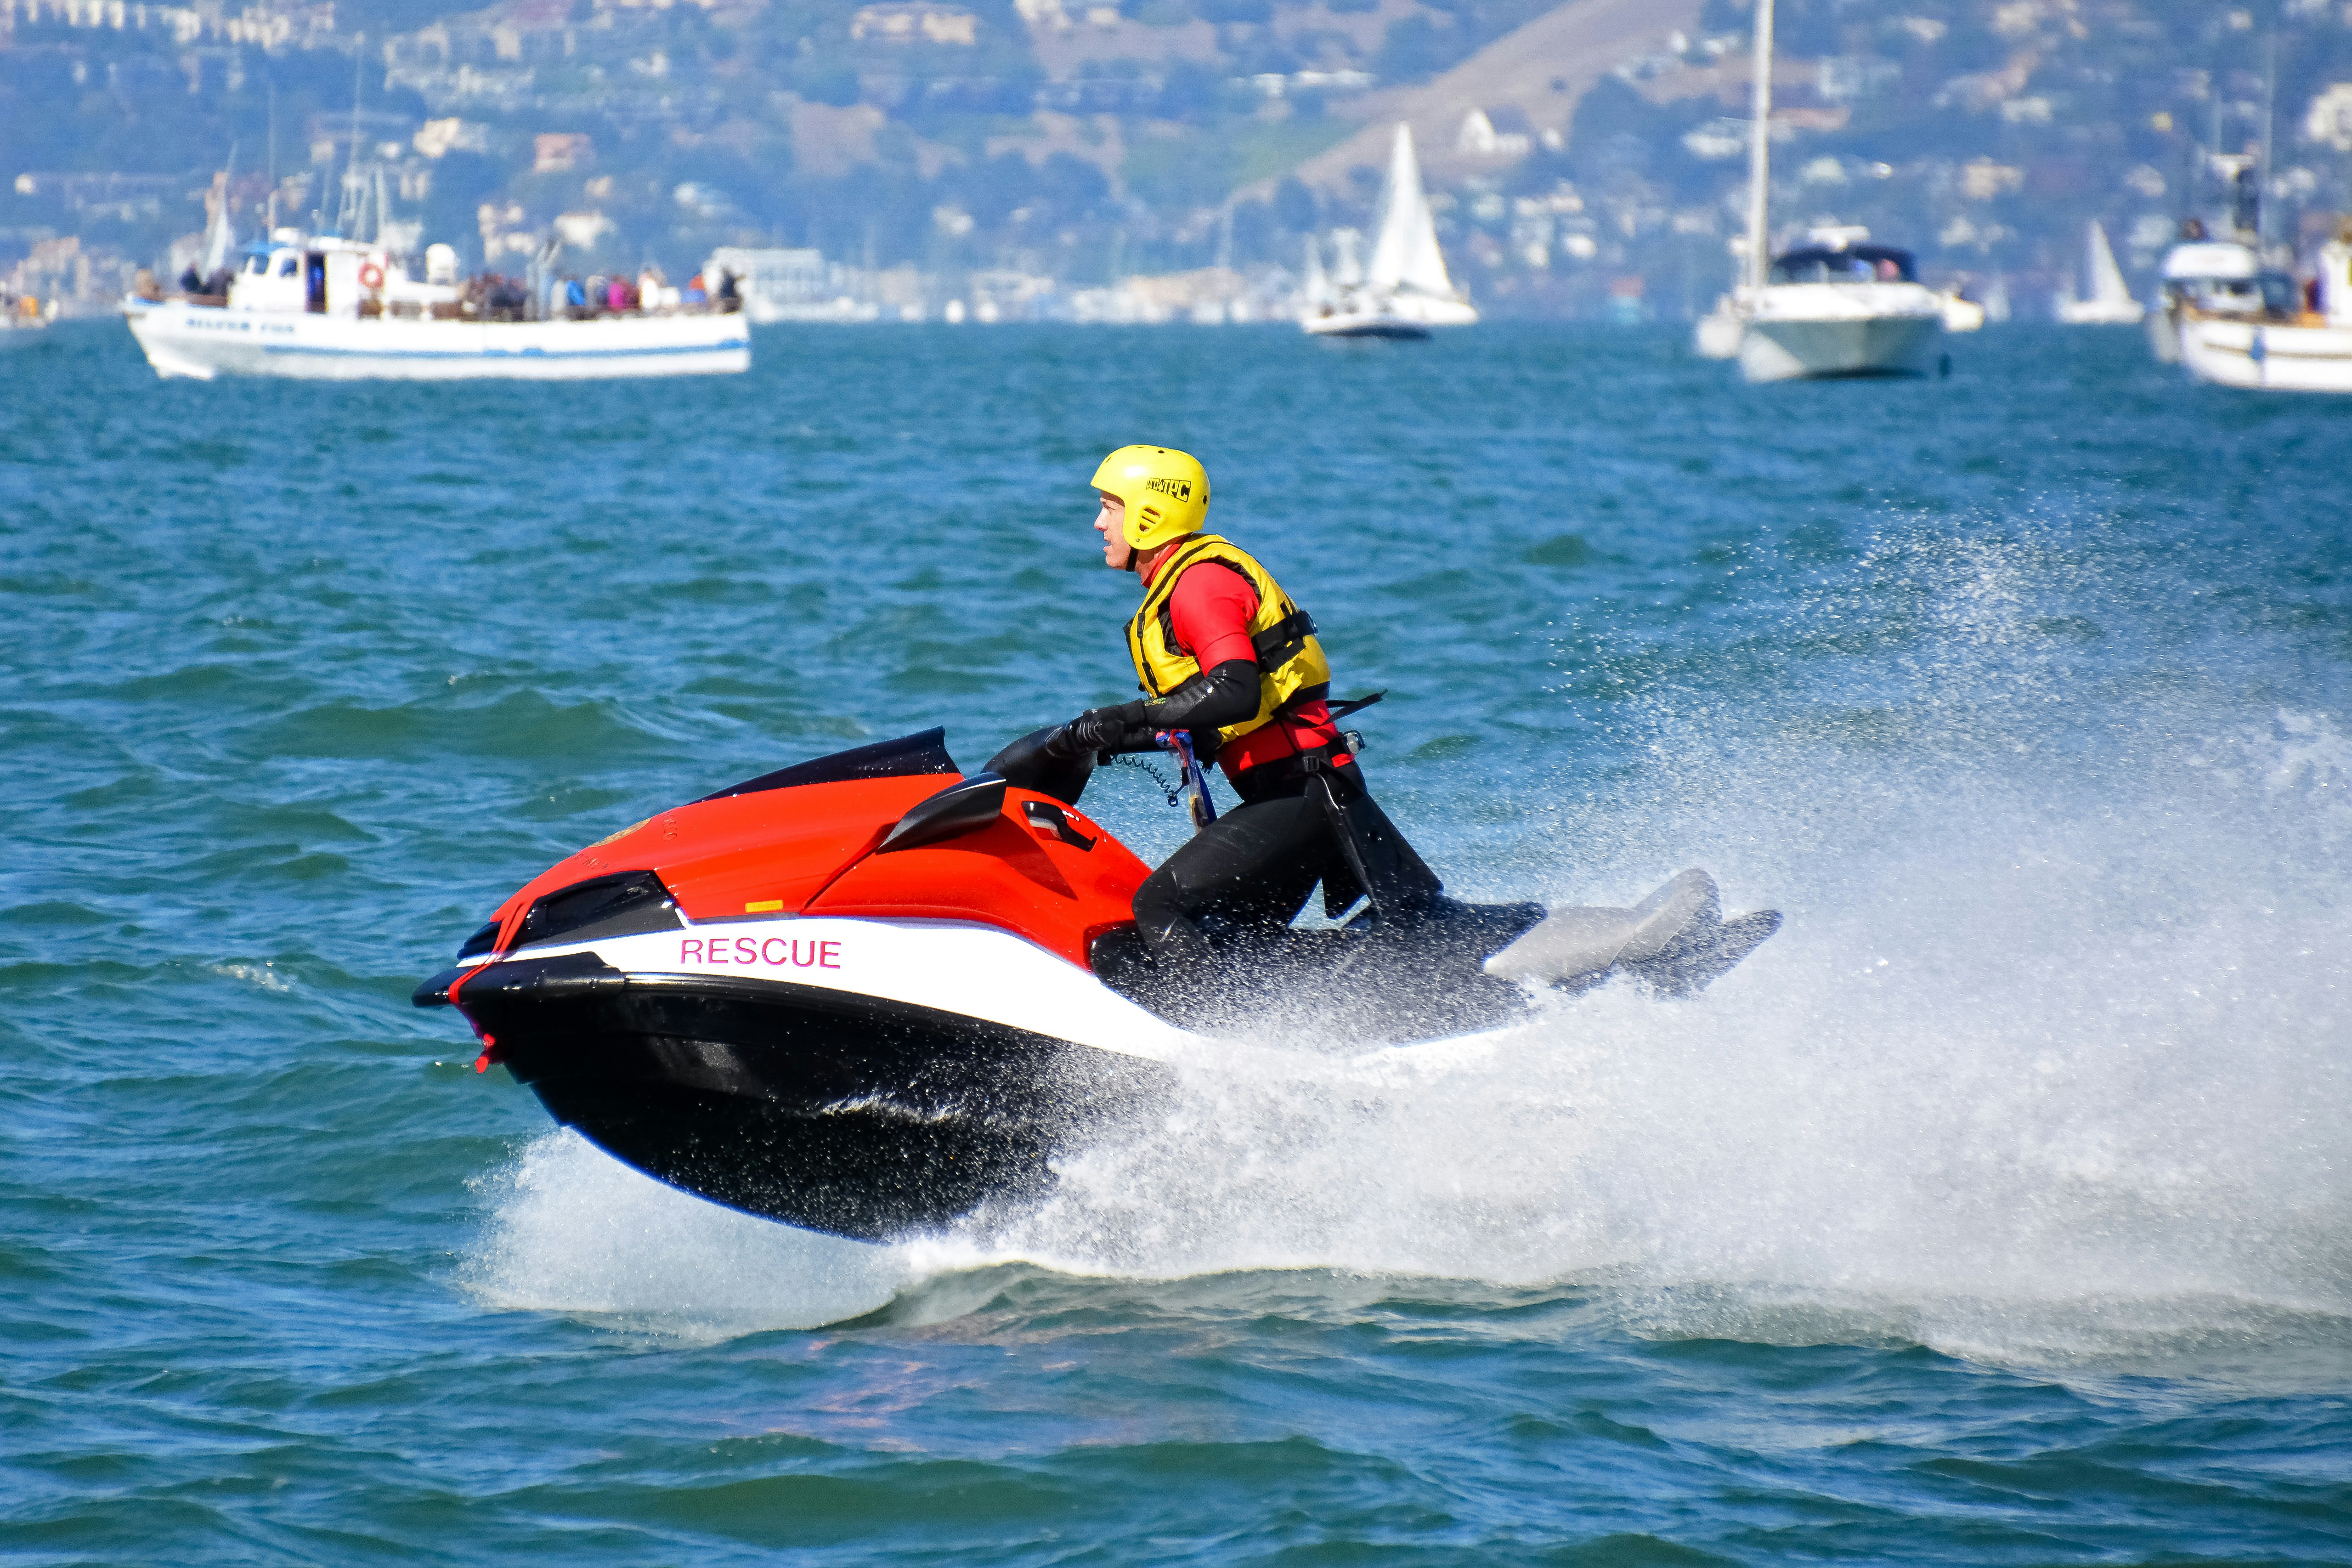 man in yellow and black suit riding red and white personal watercraft during daytime